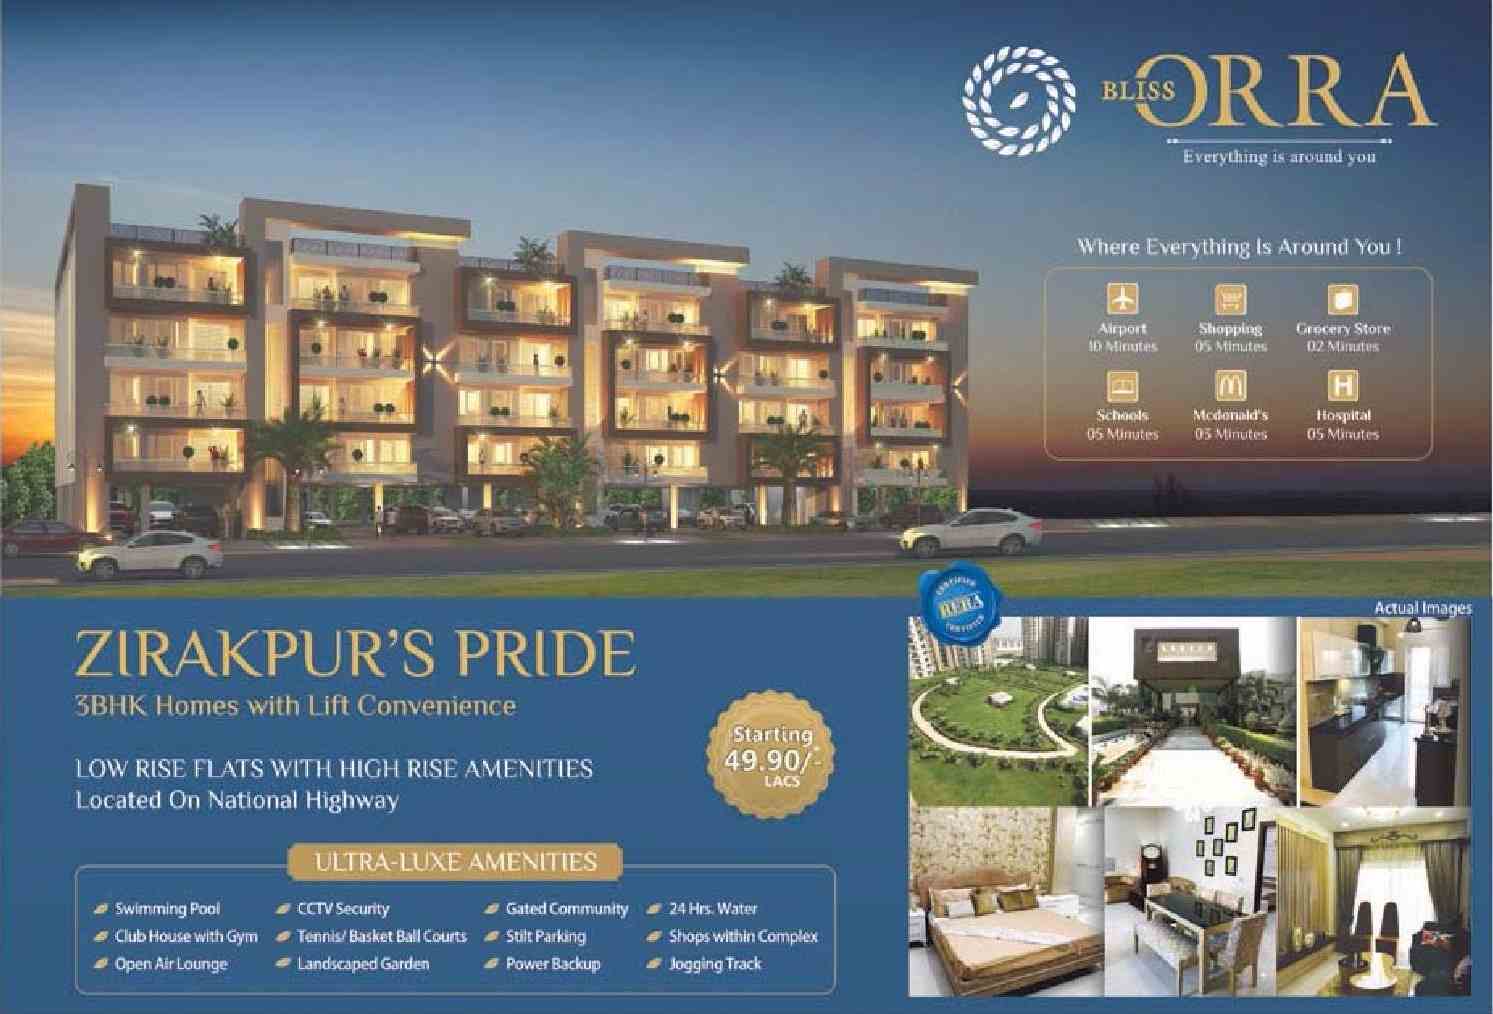 Live in low rise flats with high rise amenities at Bliss Orra in Chandigarh Update